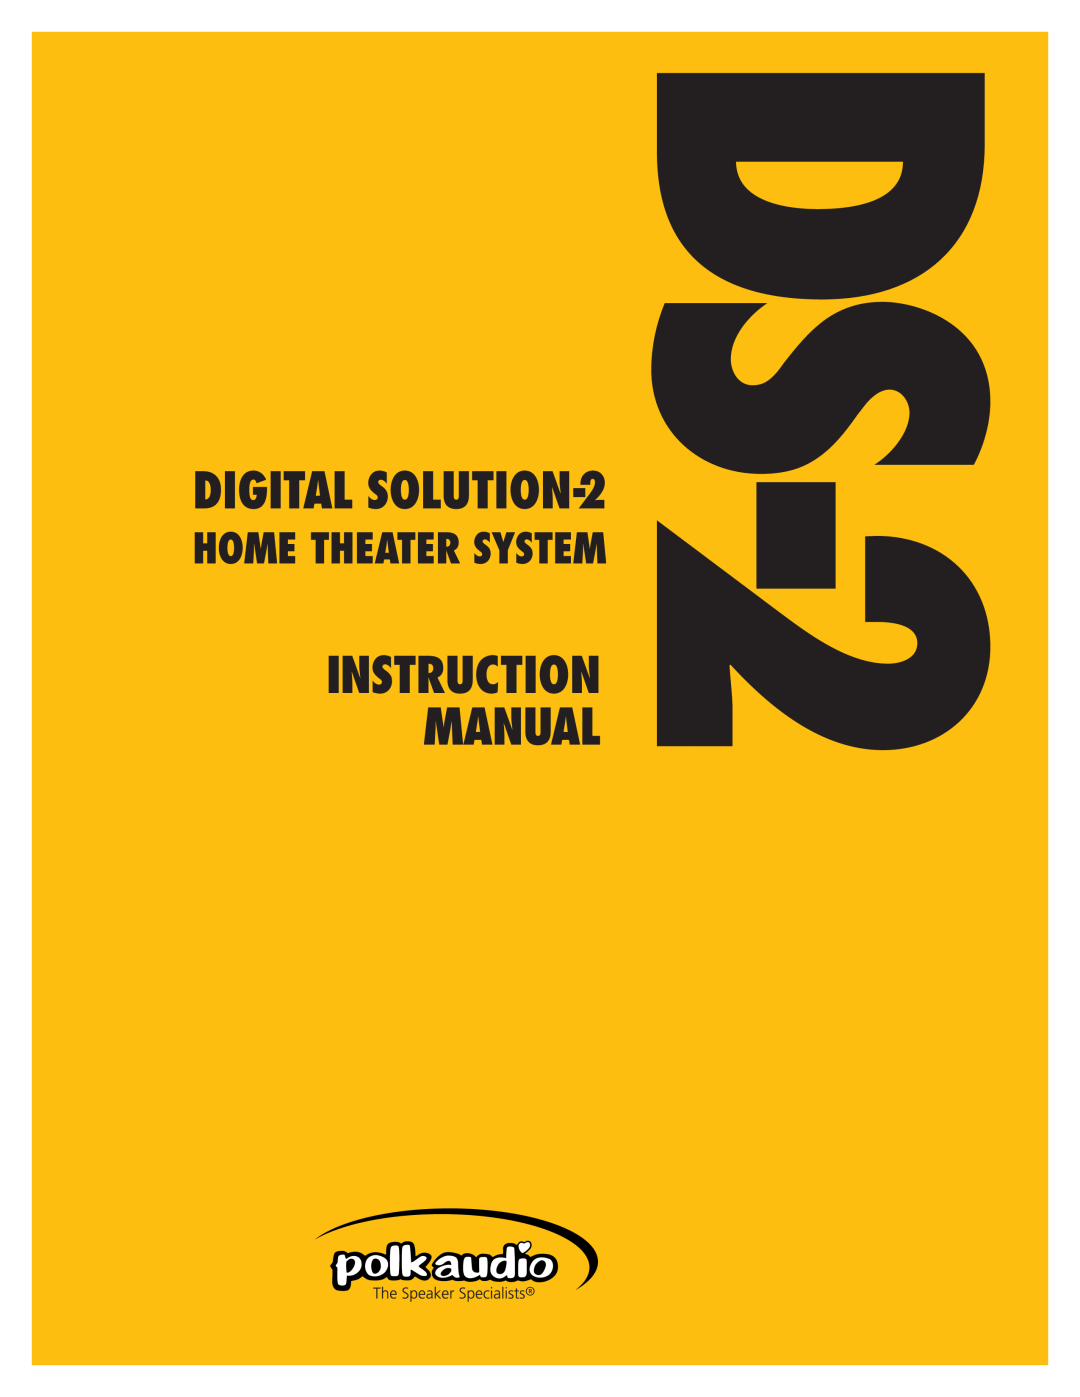 Polk Audio instruction manual DS-2, Manual, Instruction, DIGITAL SOLUTION-2, Home Theater System 